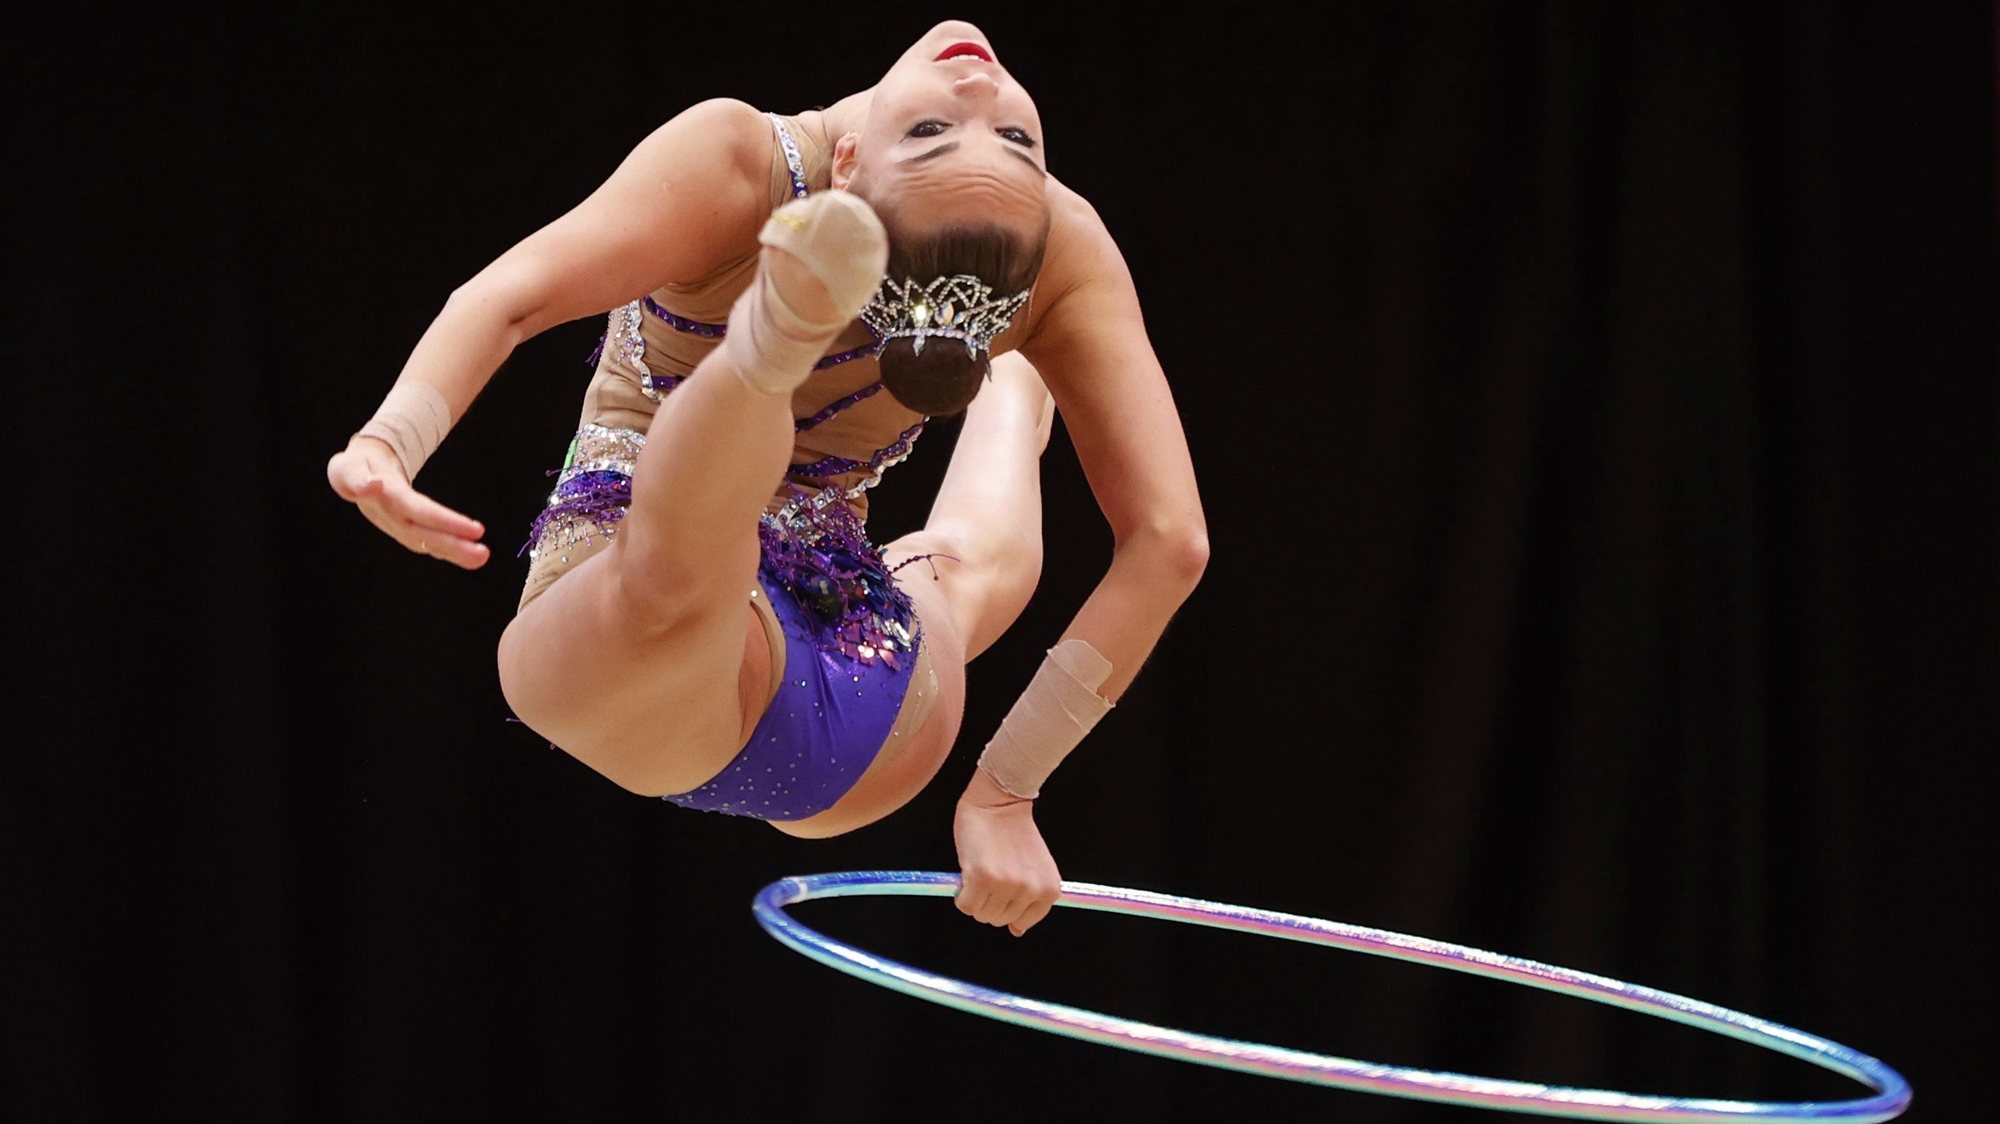 epa09550358 Dina Averina of Russia performs to win the individual hoop final of the 38th FIG Rhythmic Gymnastics World Championships in Kitakyushu, Japan, 27 October 2021.  EPA/JIJI JAPAN OUT  EDITORIAL USE ONLY/NO SALES/NO ARCHIVES